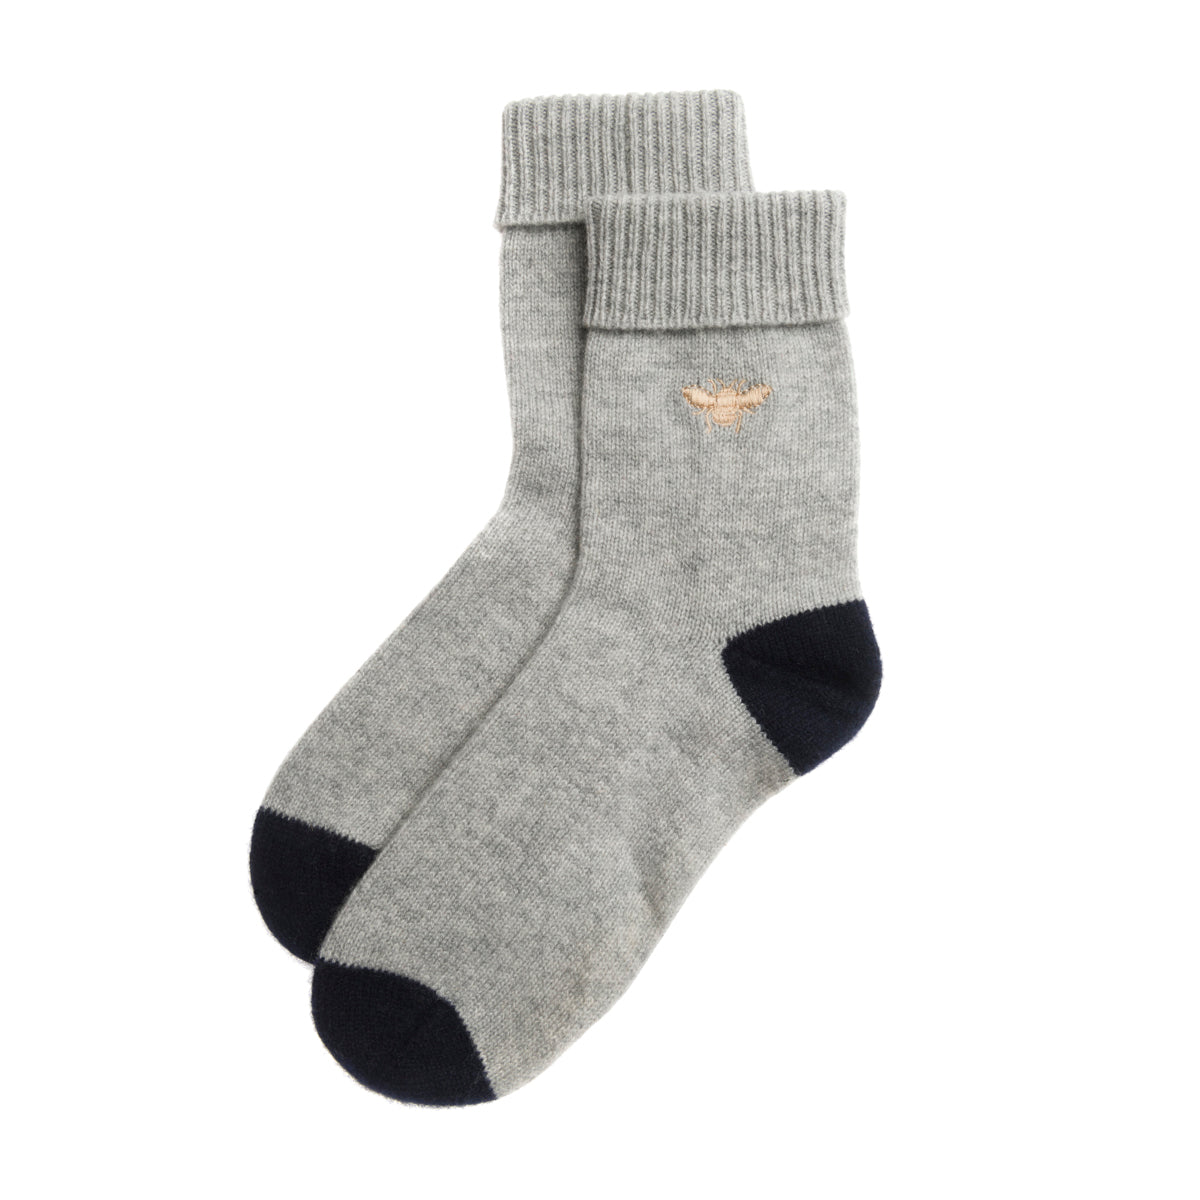 Bees Cashmere Socks